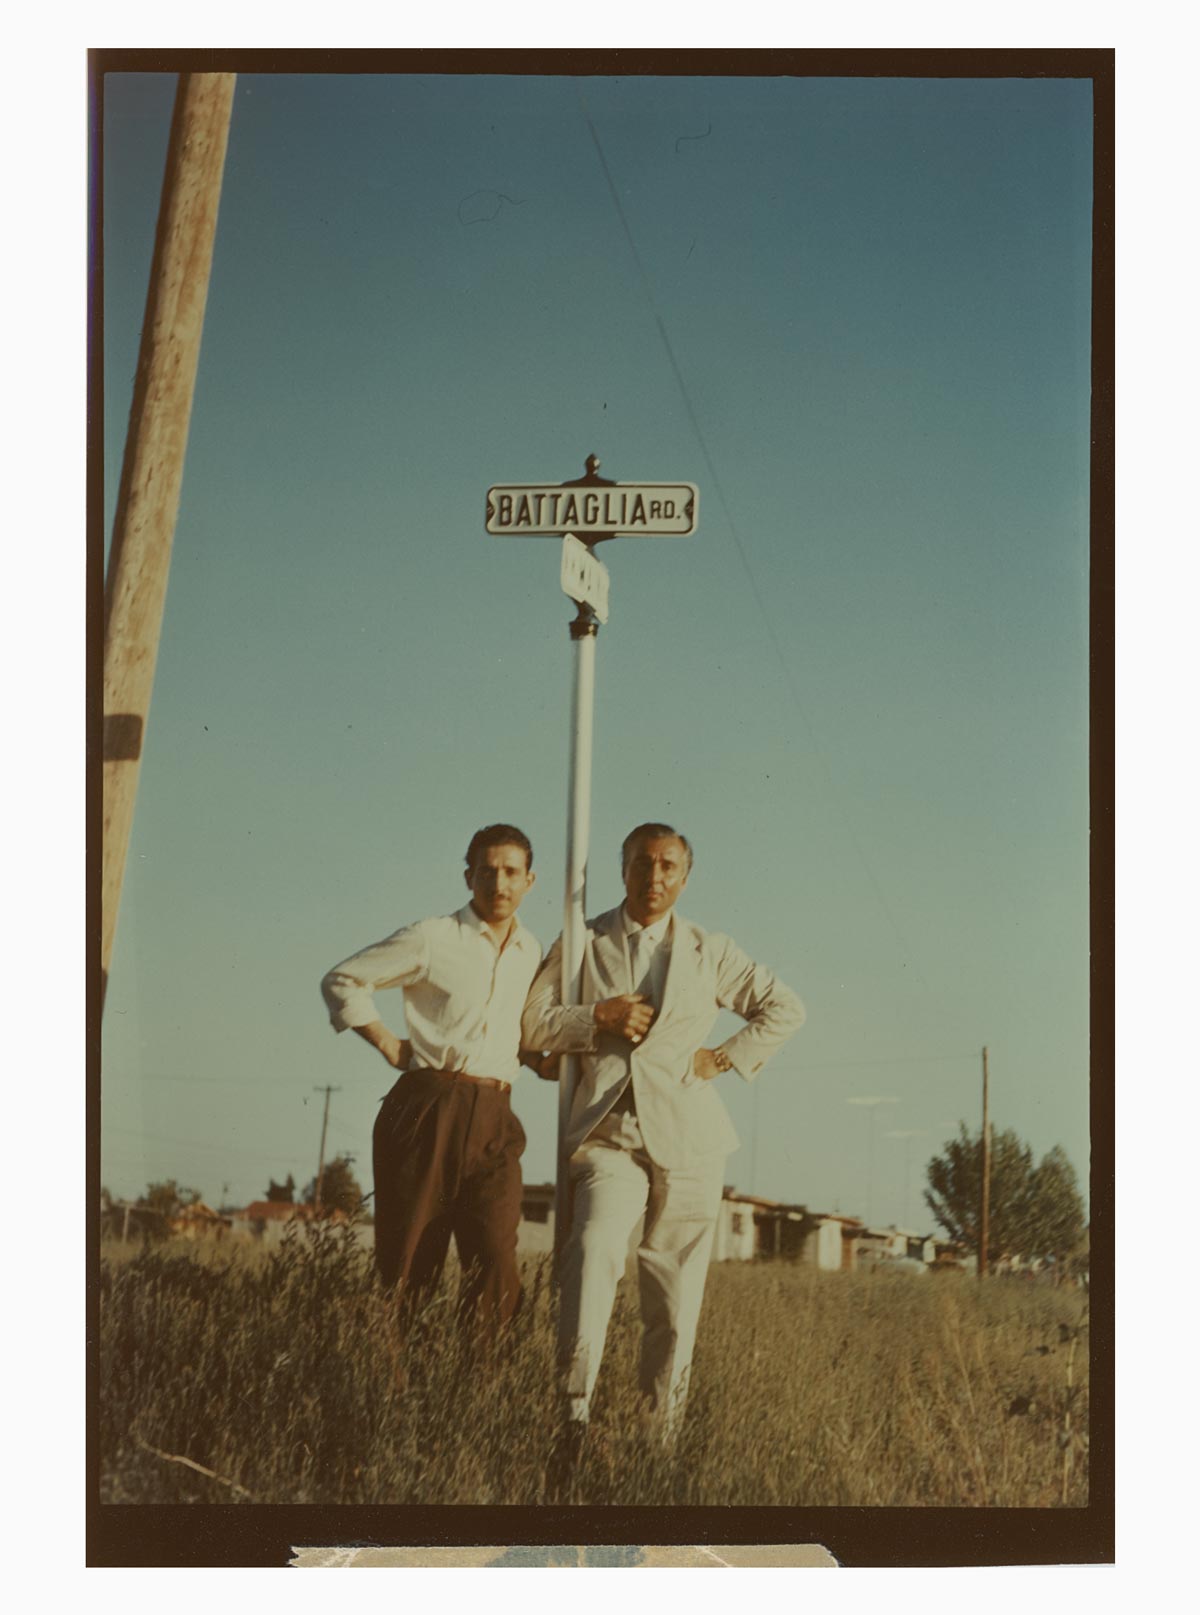 A photo of Battaglia's founder, Giuseppe Battaglia, with a friend standing next to a sign that says Battaglia Rd. Both men look like they are in a grassy field. 